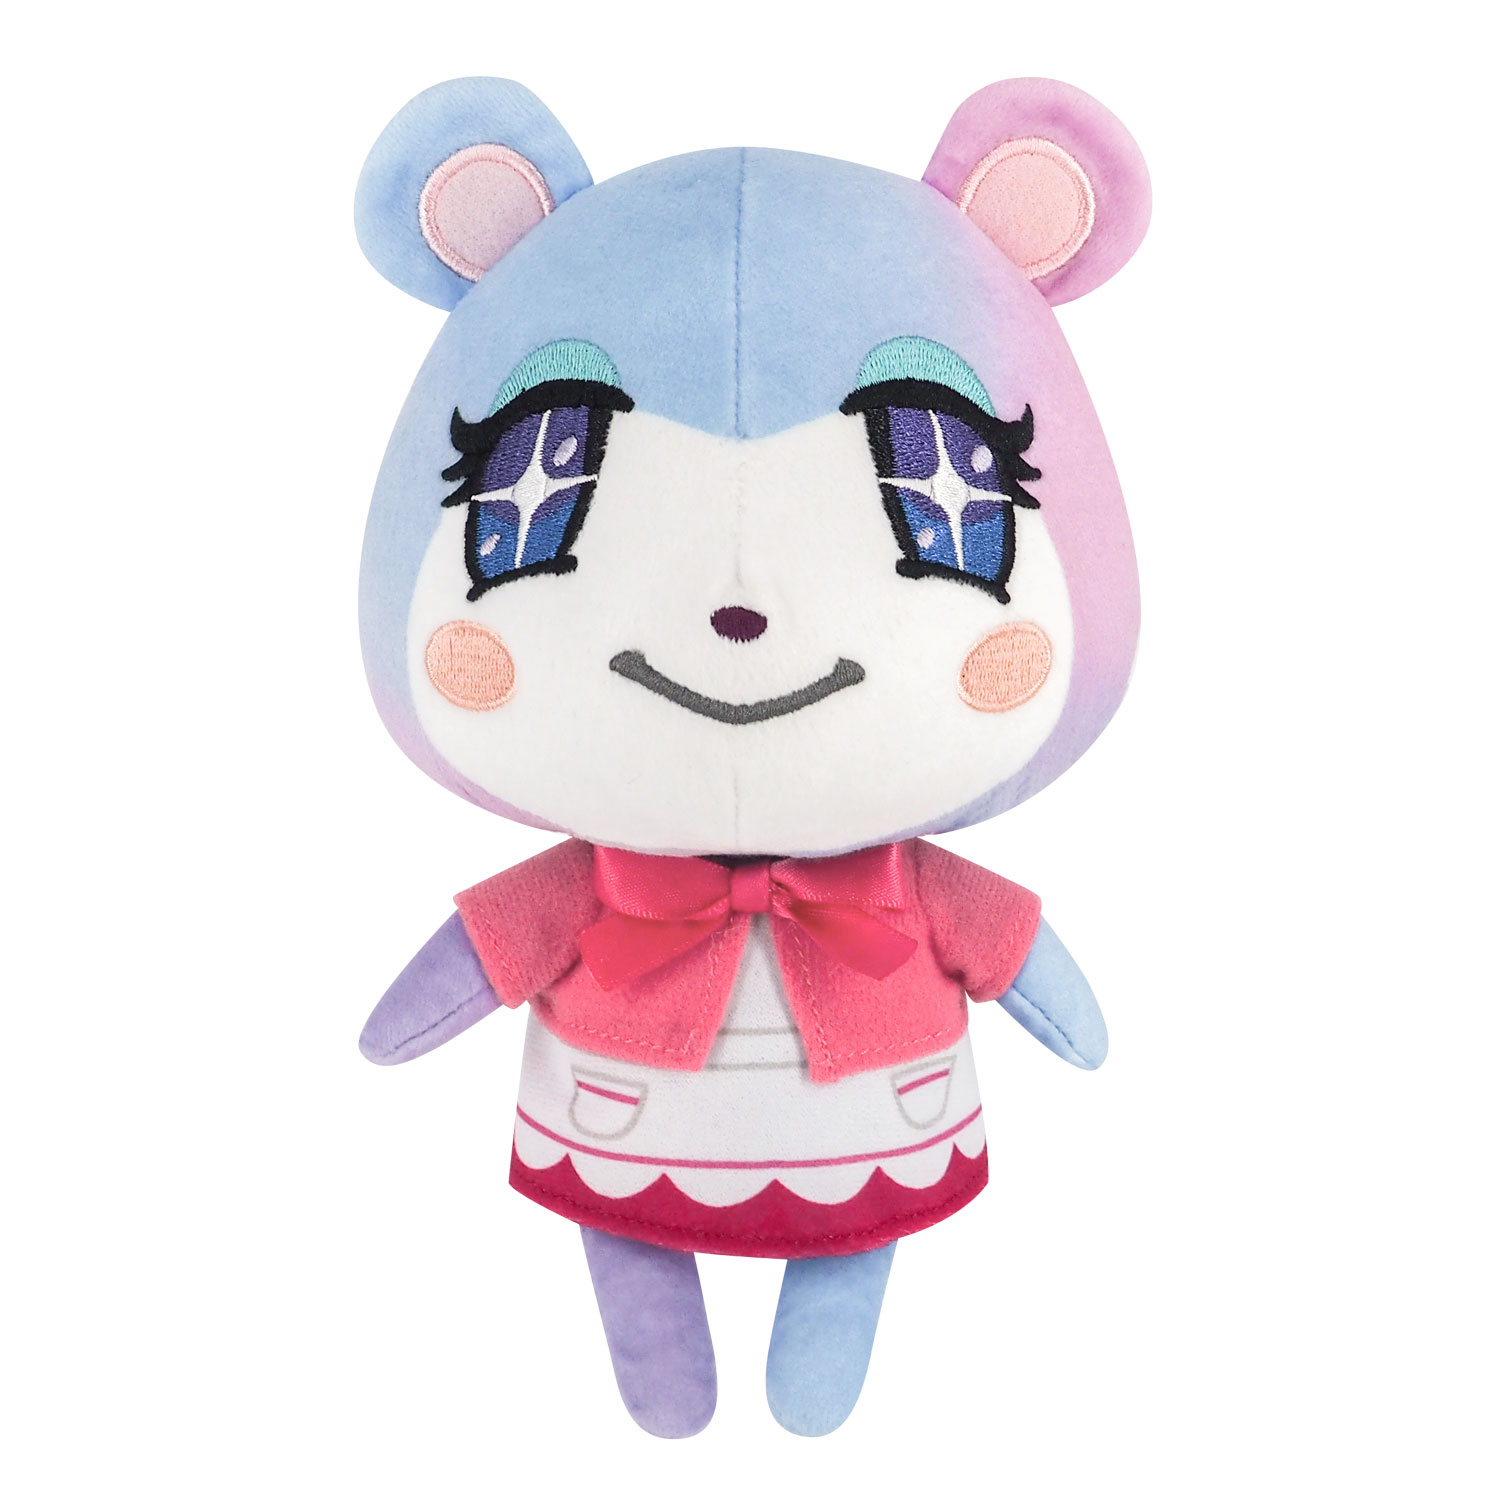 Five New Adorable Animal Crossing Villager Plushies Are Coming